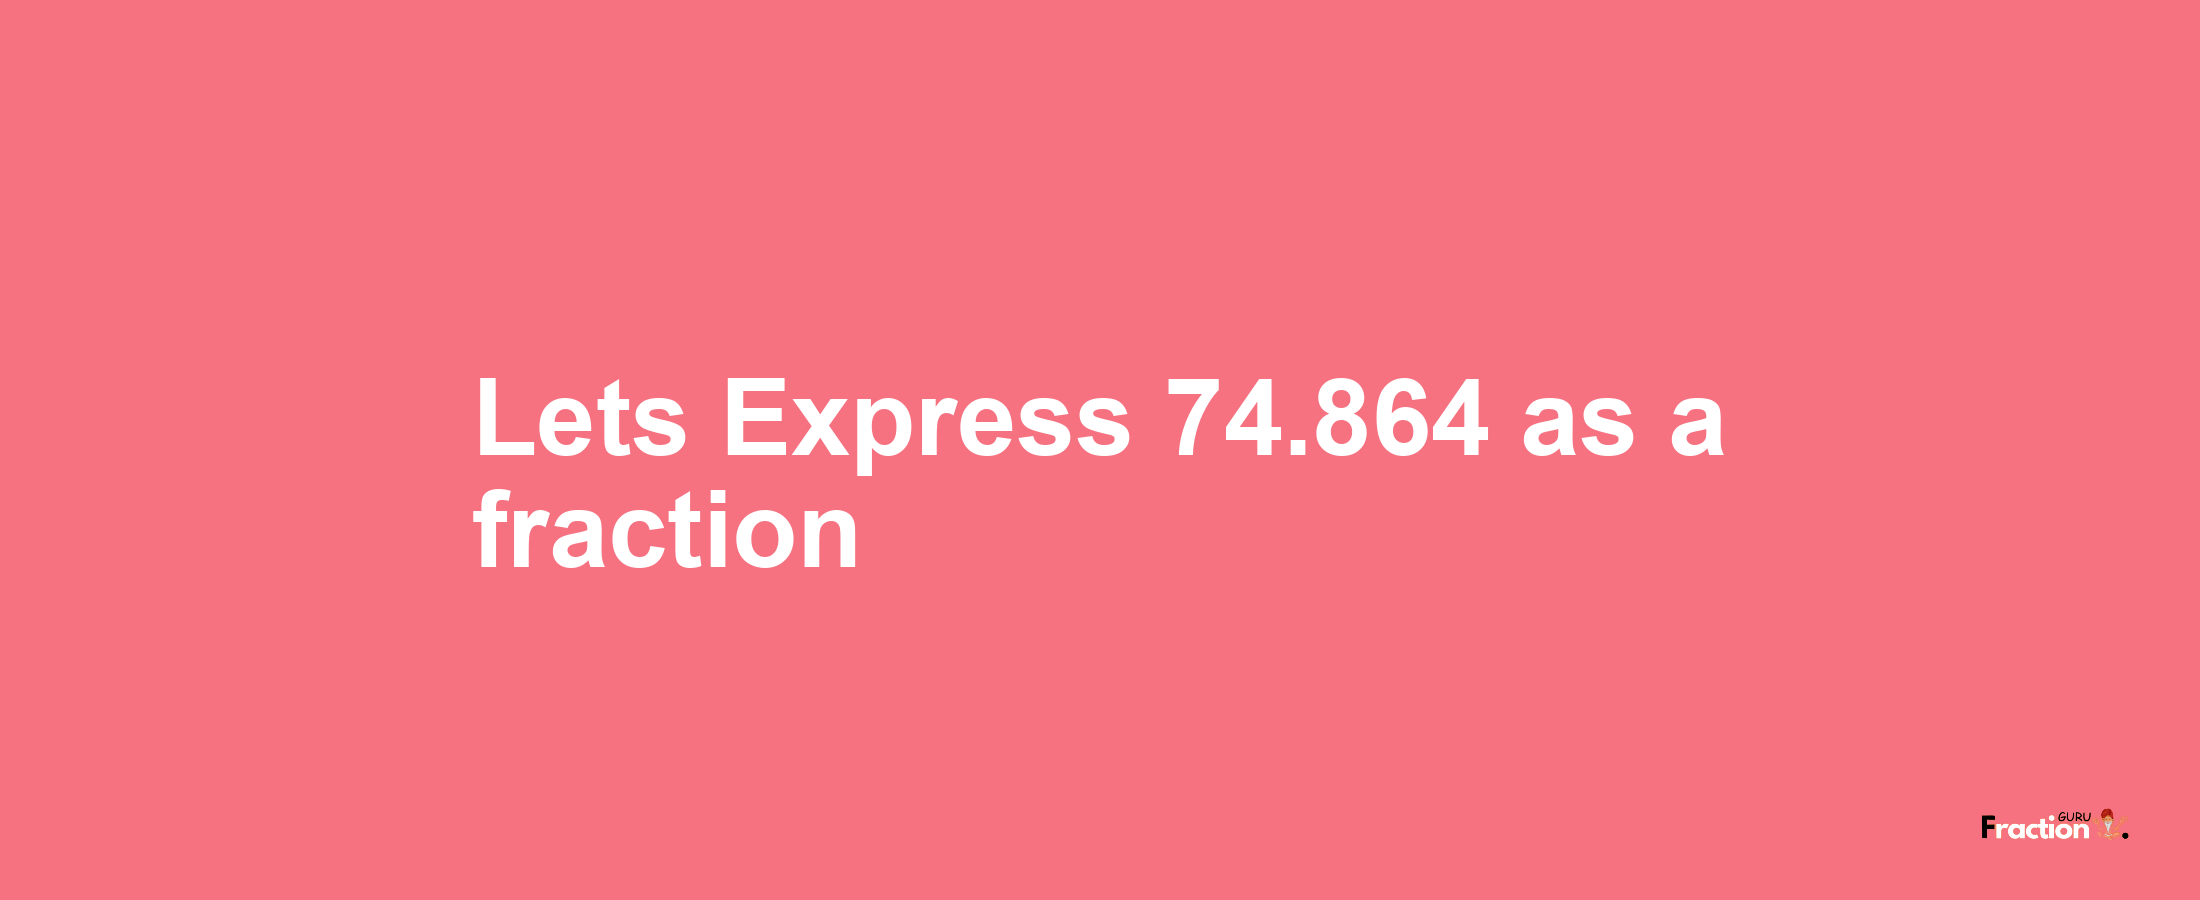 Lets Express 74.864 as afraction